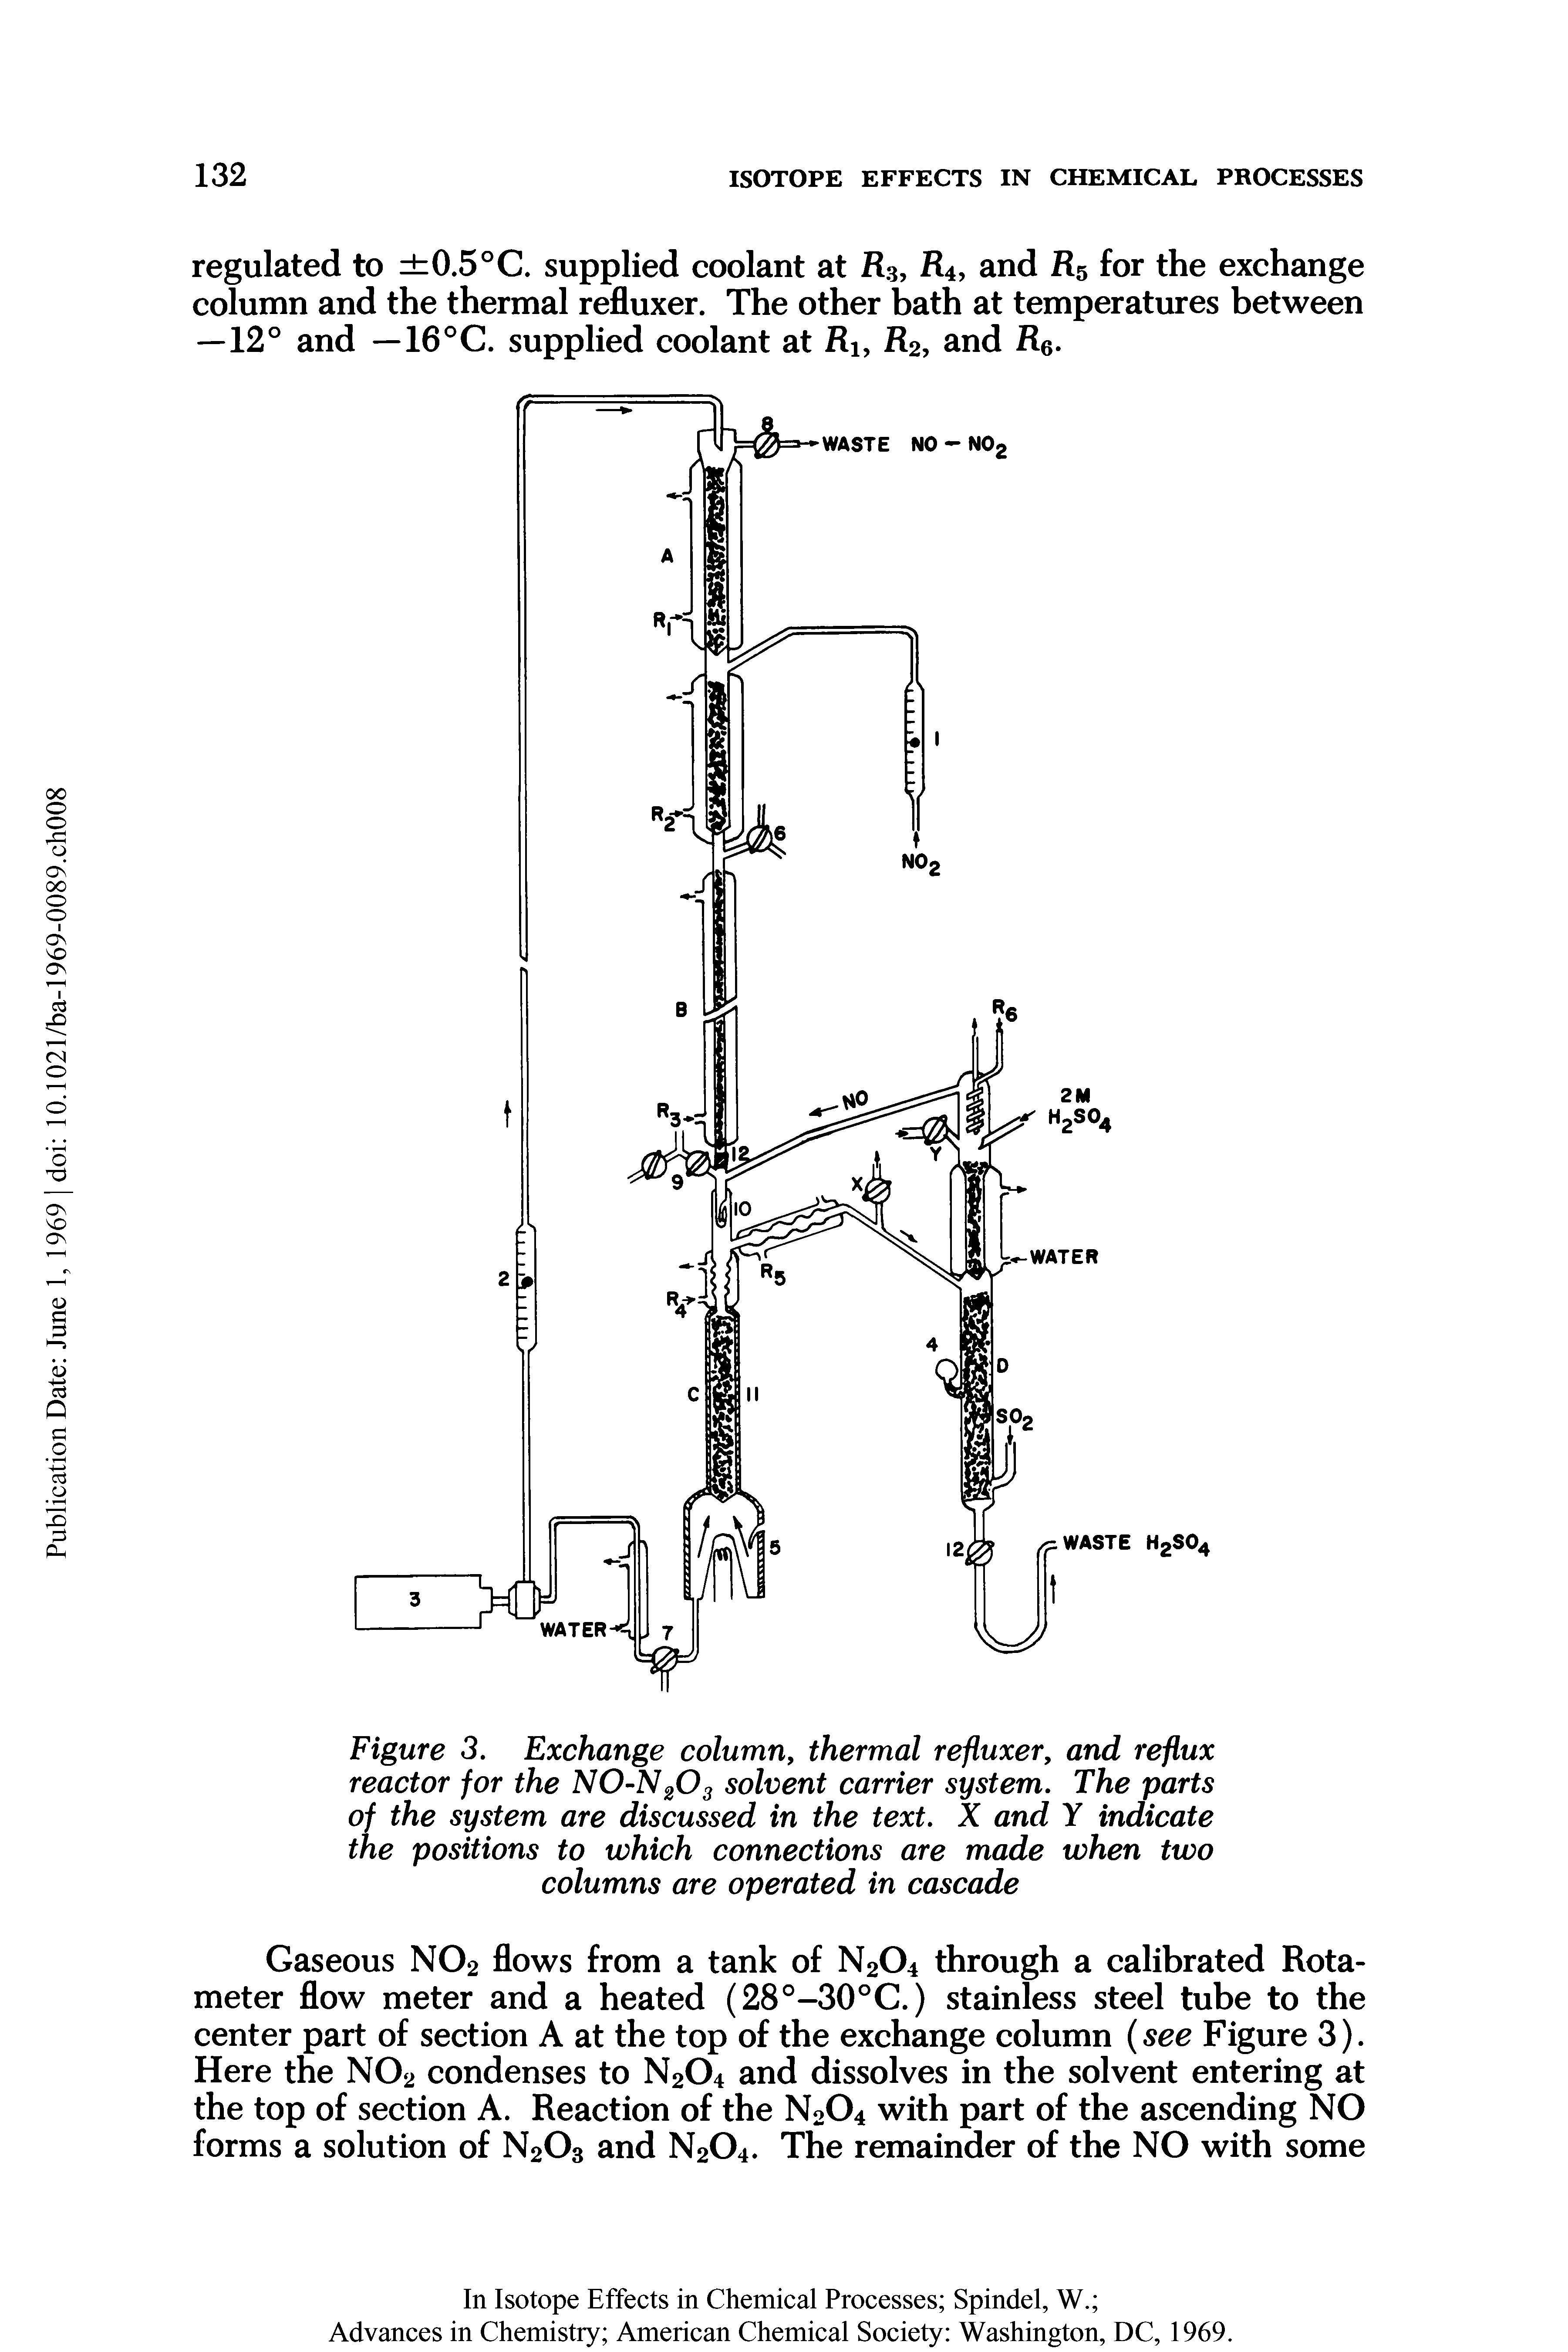 Figure 3. Exchange column, thermal refluxer, and reflux reactor for the NO-N2O3 solvent carrier system. The parts of the system are discussed in the text. X and Y indicate the positions to which connections are made when two columns are operated in cascade...